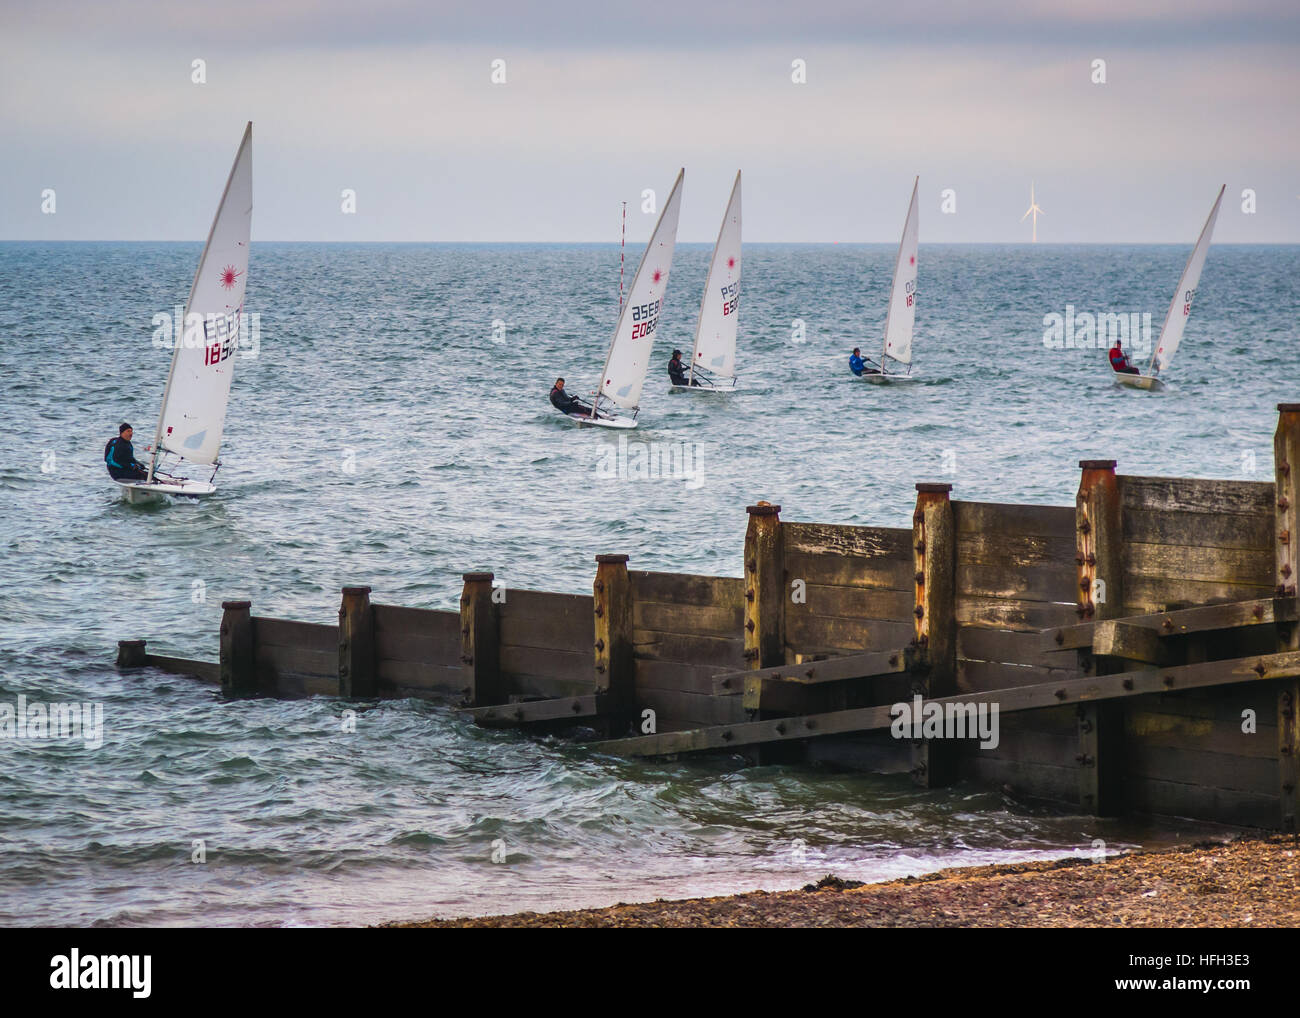 Whitstable, UK. 31st Dec, 2016. Whitstable, UK - Dec 31 2016  Members of Whitstable yacht club sailing in dinghy laser boats in front of the distinctive wooden groynes on Whitstable beach on New Years Eve 2016. © CBCK-Christine/Alamy Live News Stock Photo